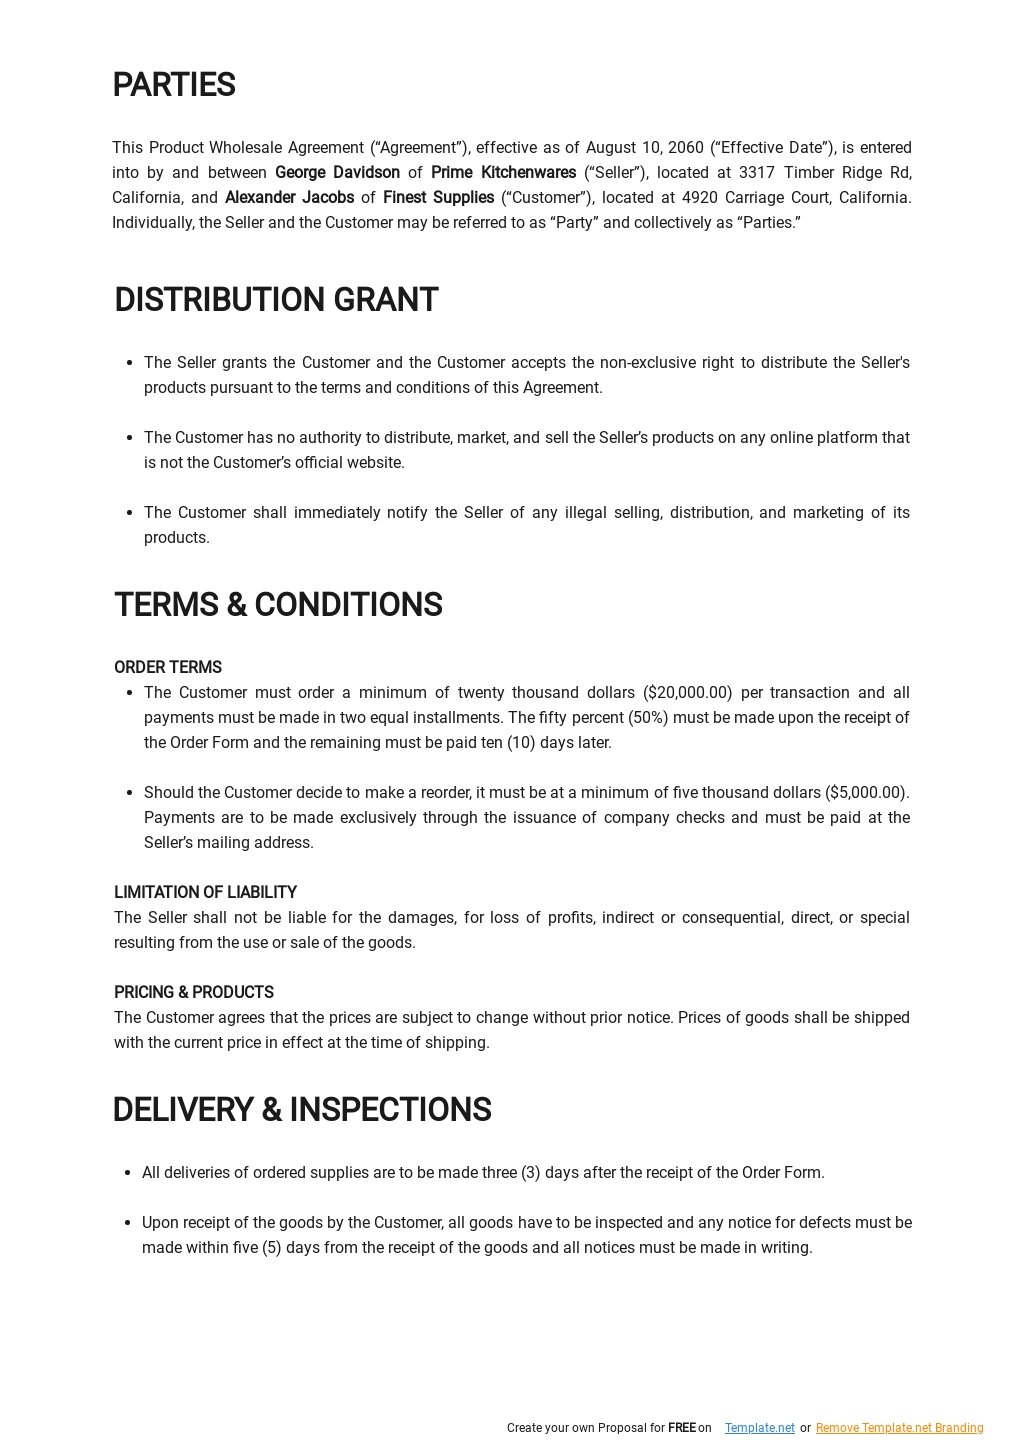 product-wholesale-agreement-template-free-pdf-google-docs-word